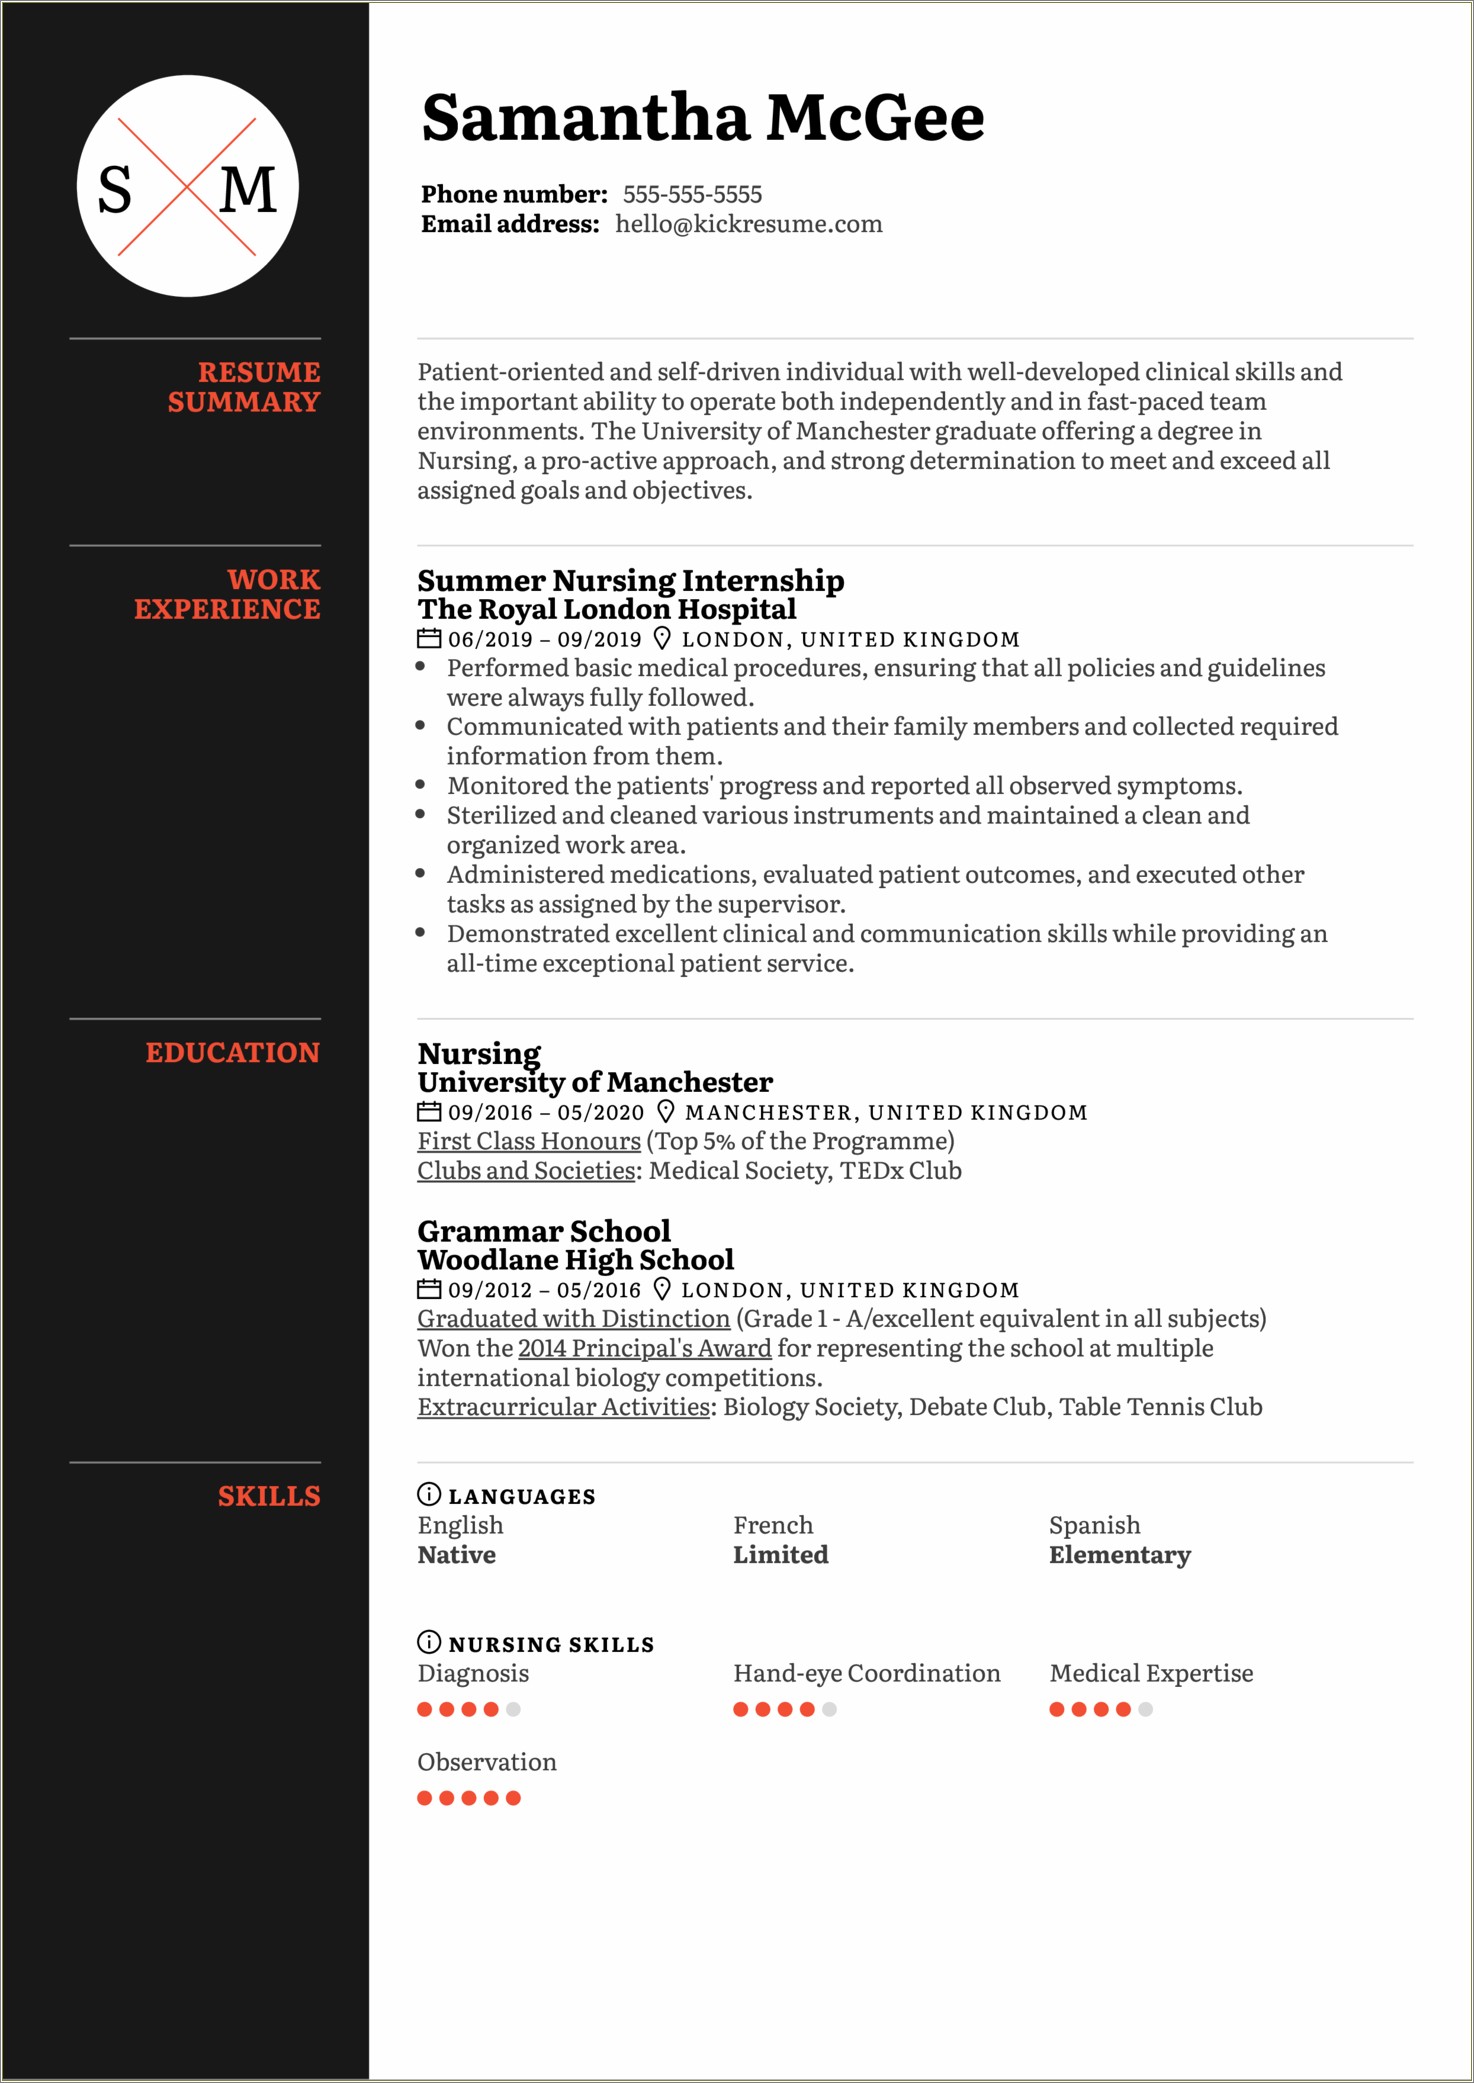 New Grad Rn Resume With No Experience Template